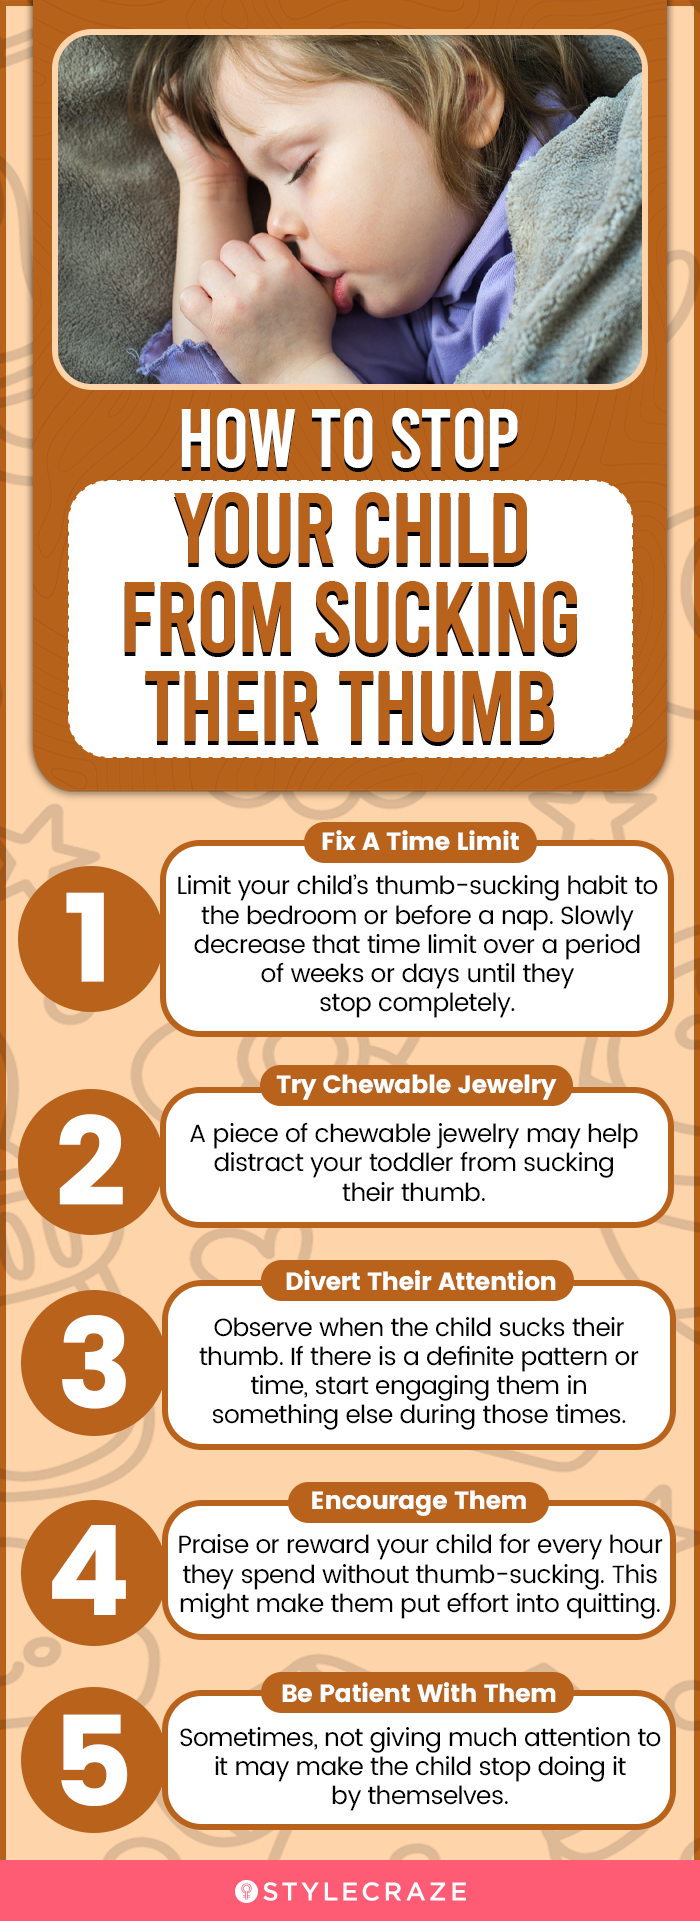  how to stop your baby's thumb sucking (infographic)